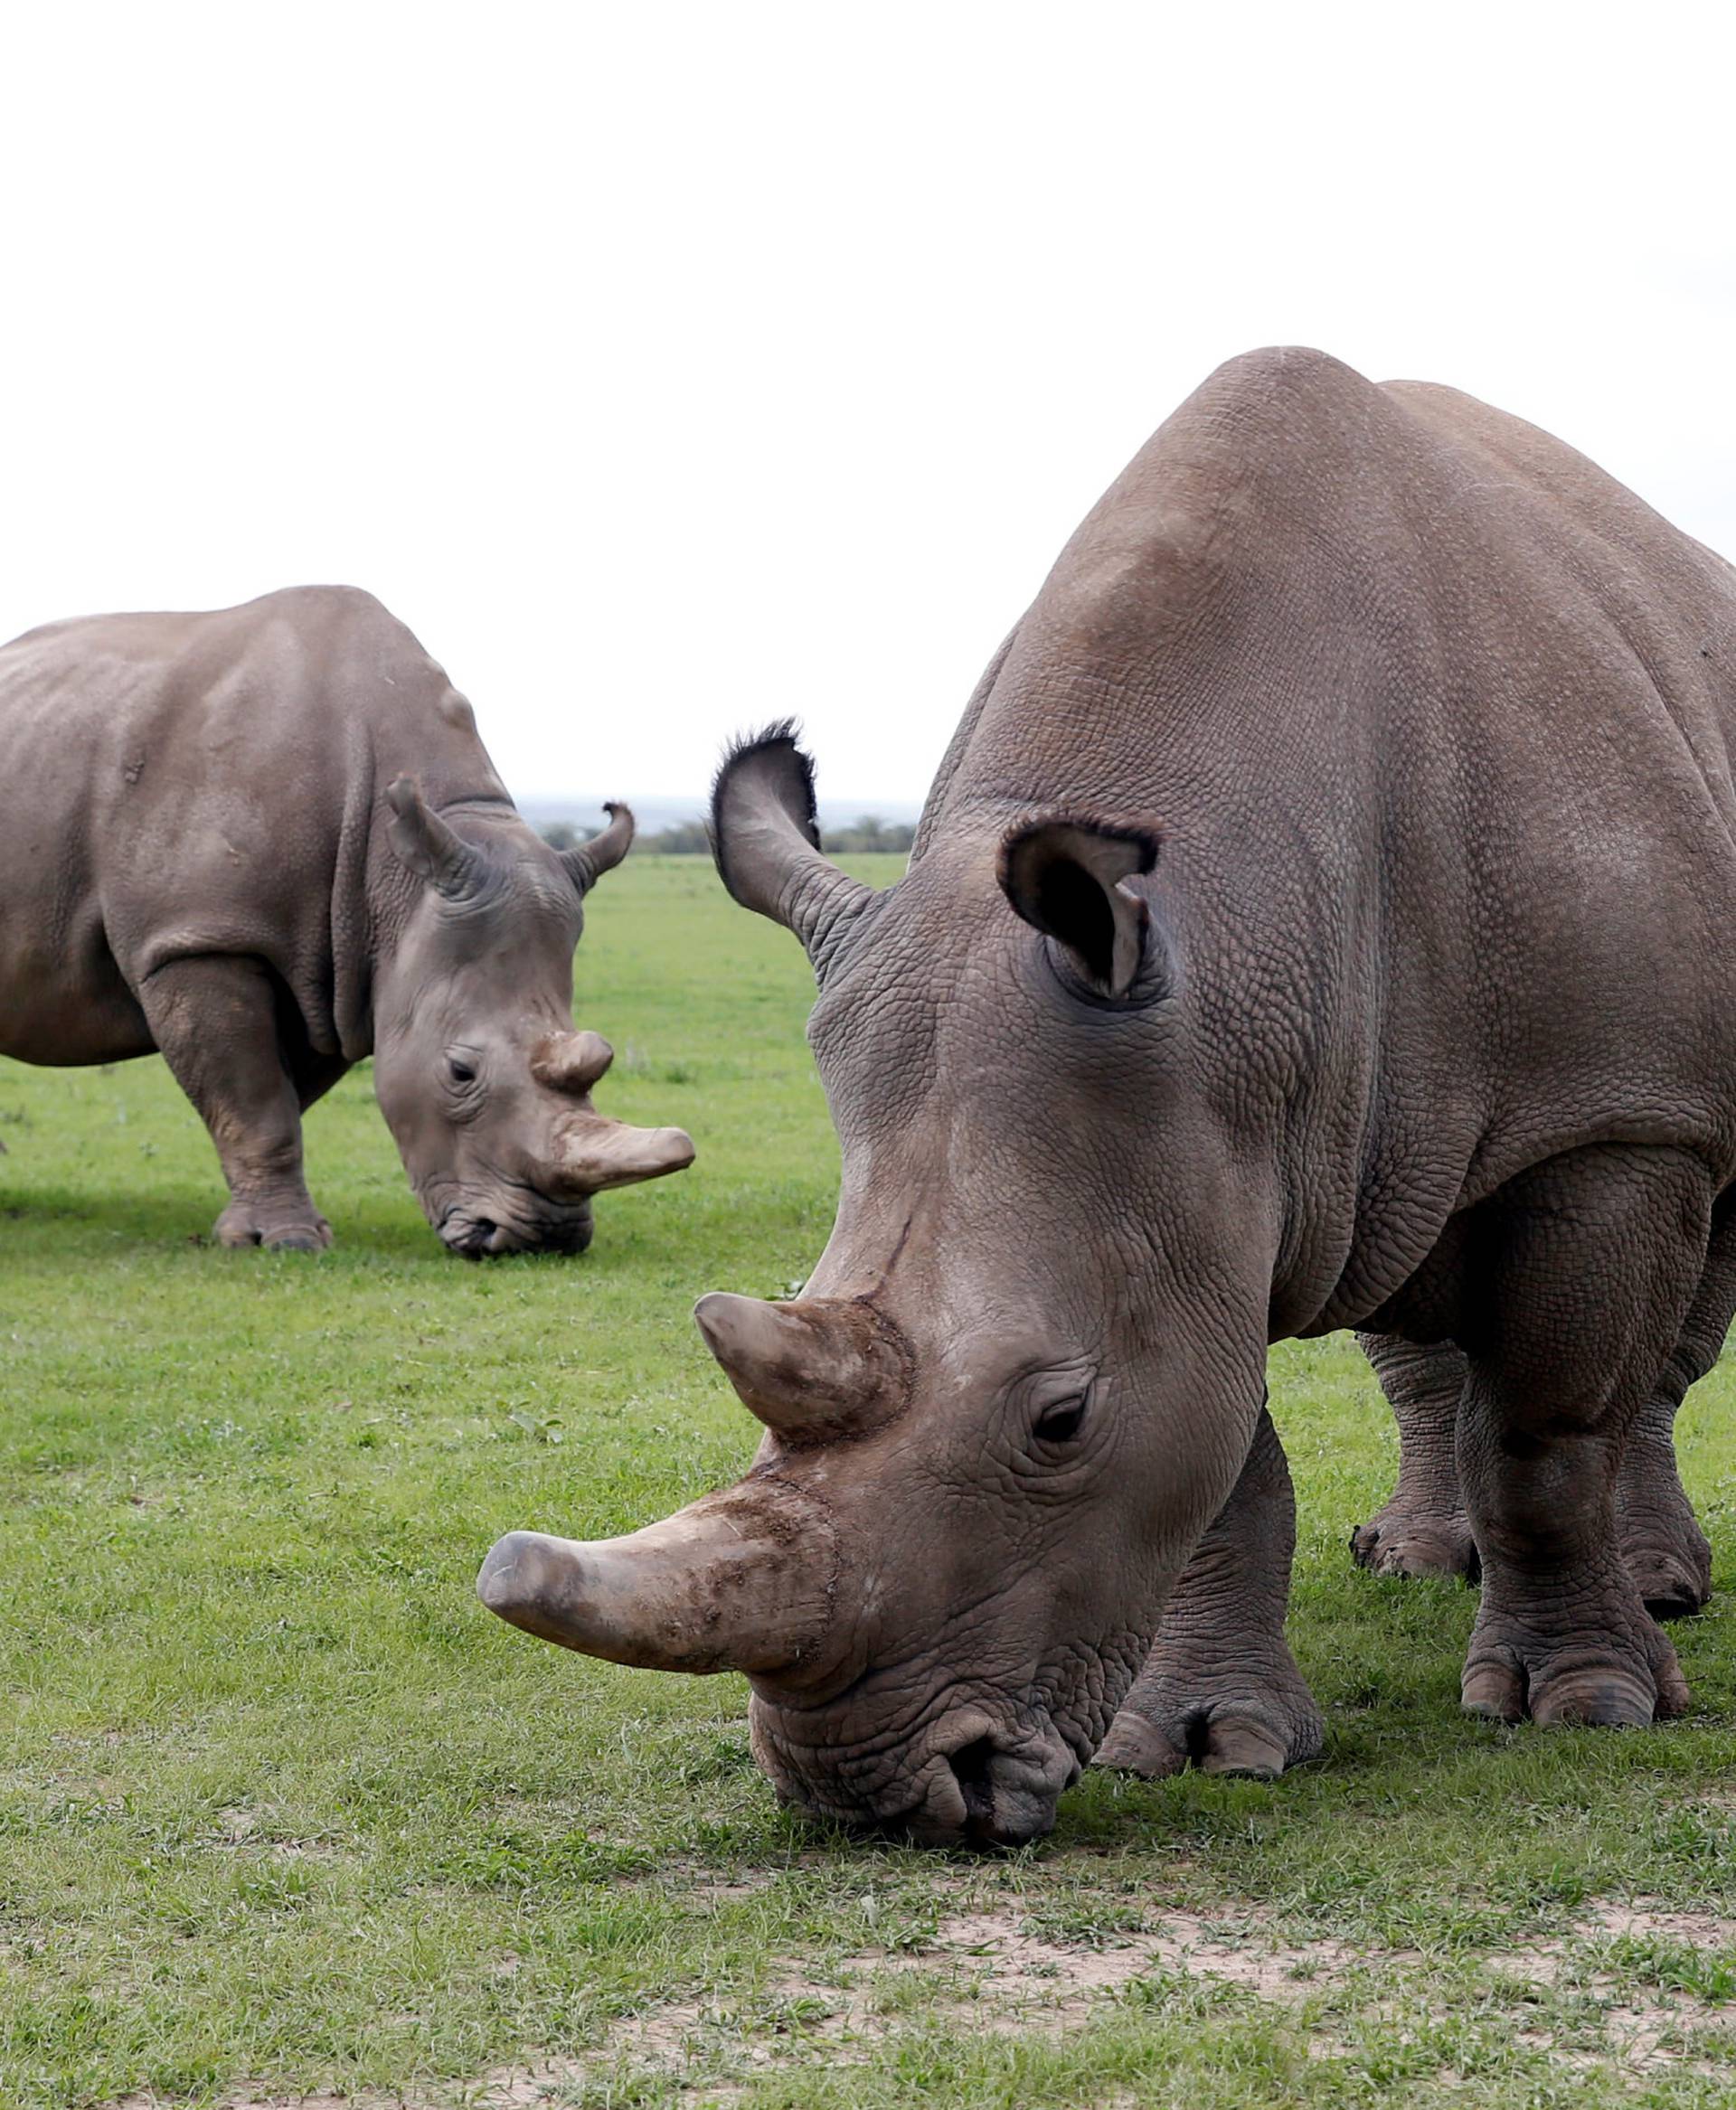 Najin and her daughter Patu, the last two northern white rhino females, graze in their enclosure at the Ol Pejeta Conservancy in Laikipia National Park